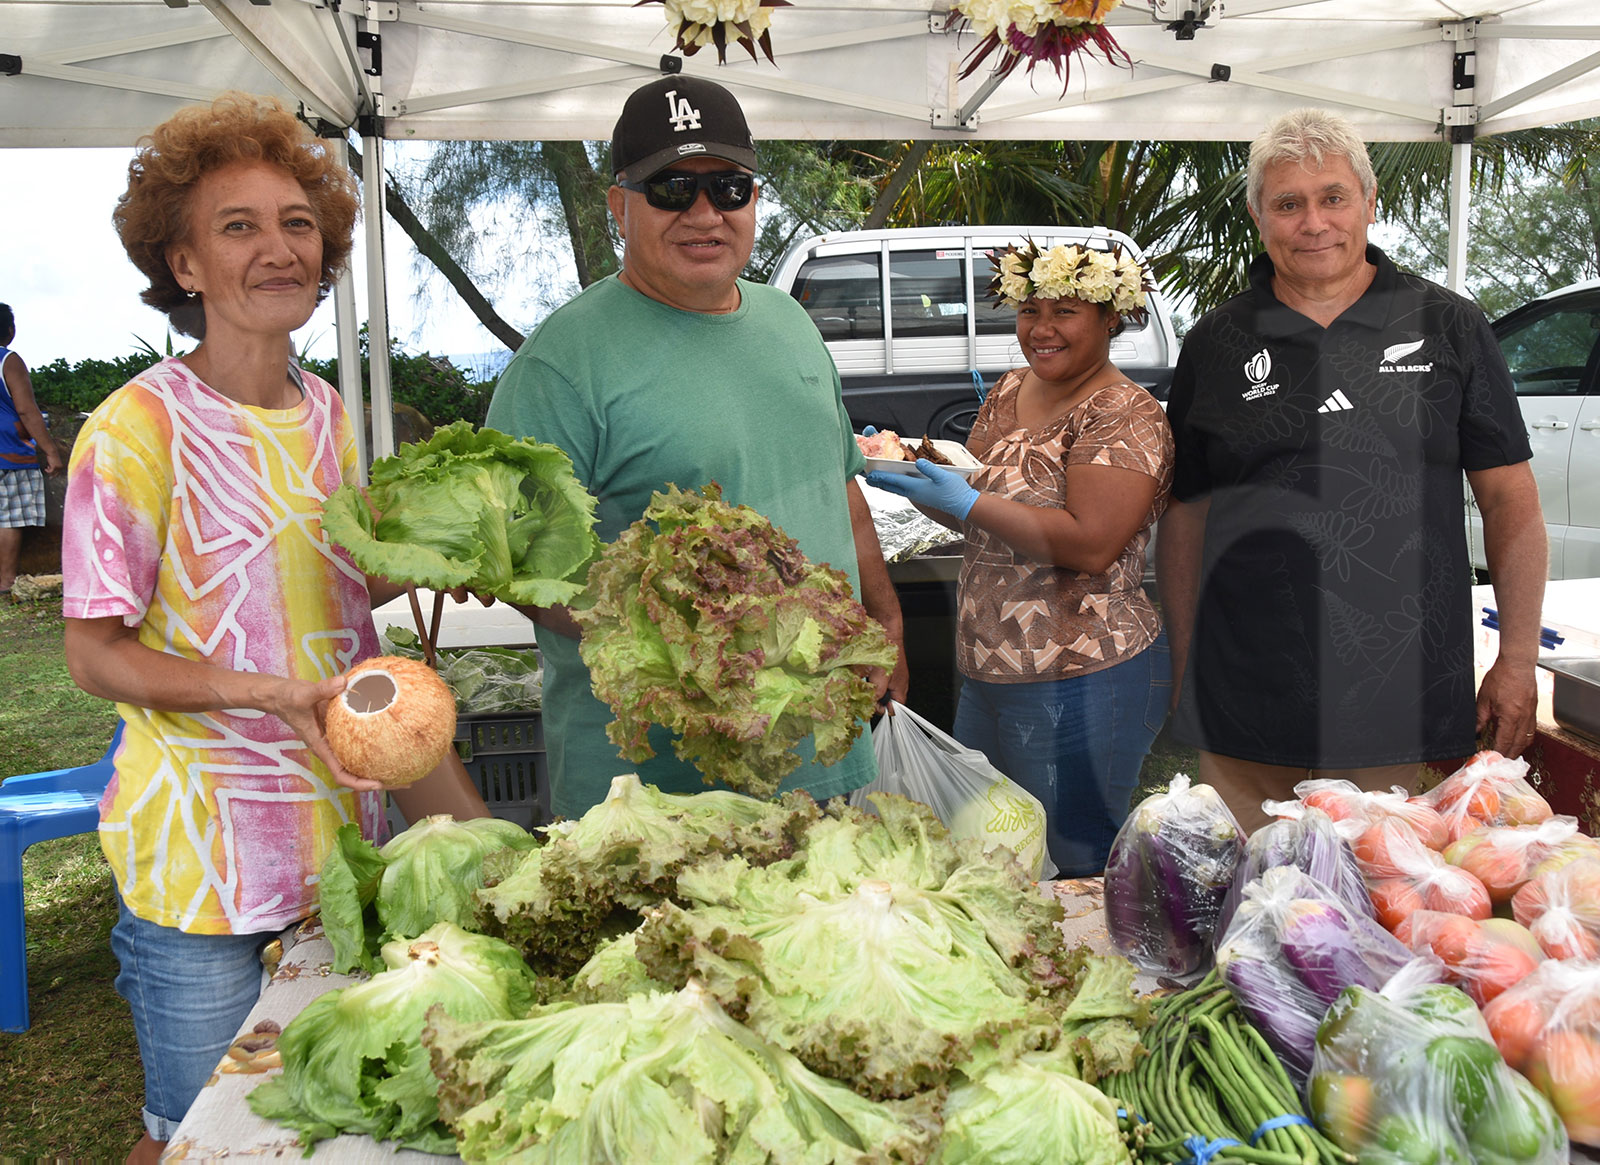 World Food Day event celebrates Cook Islands produce and culture